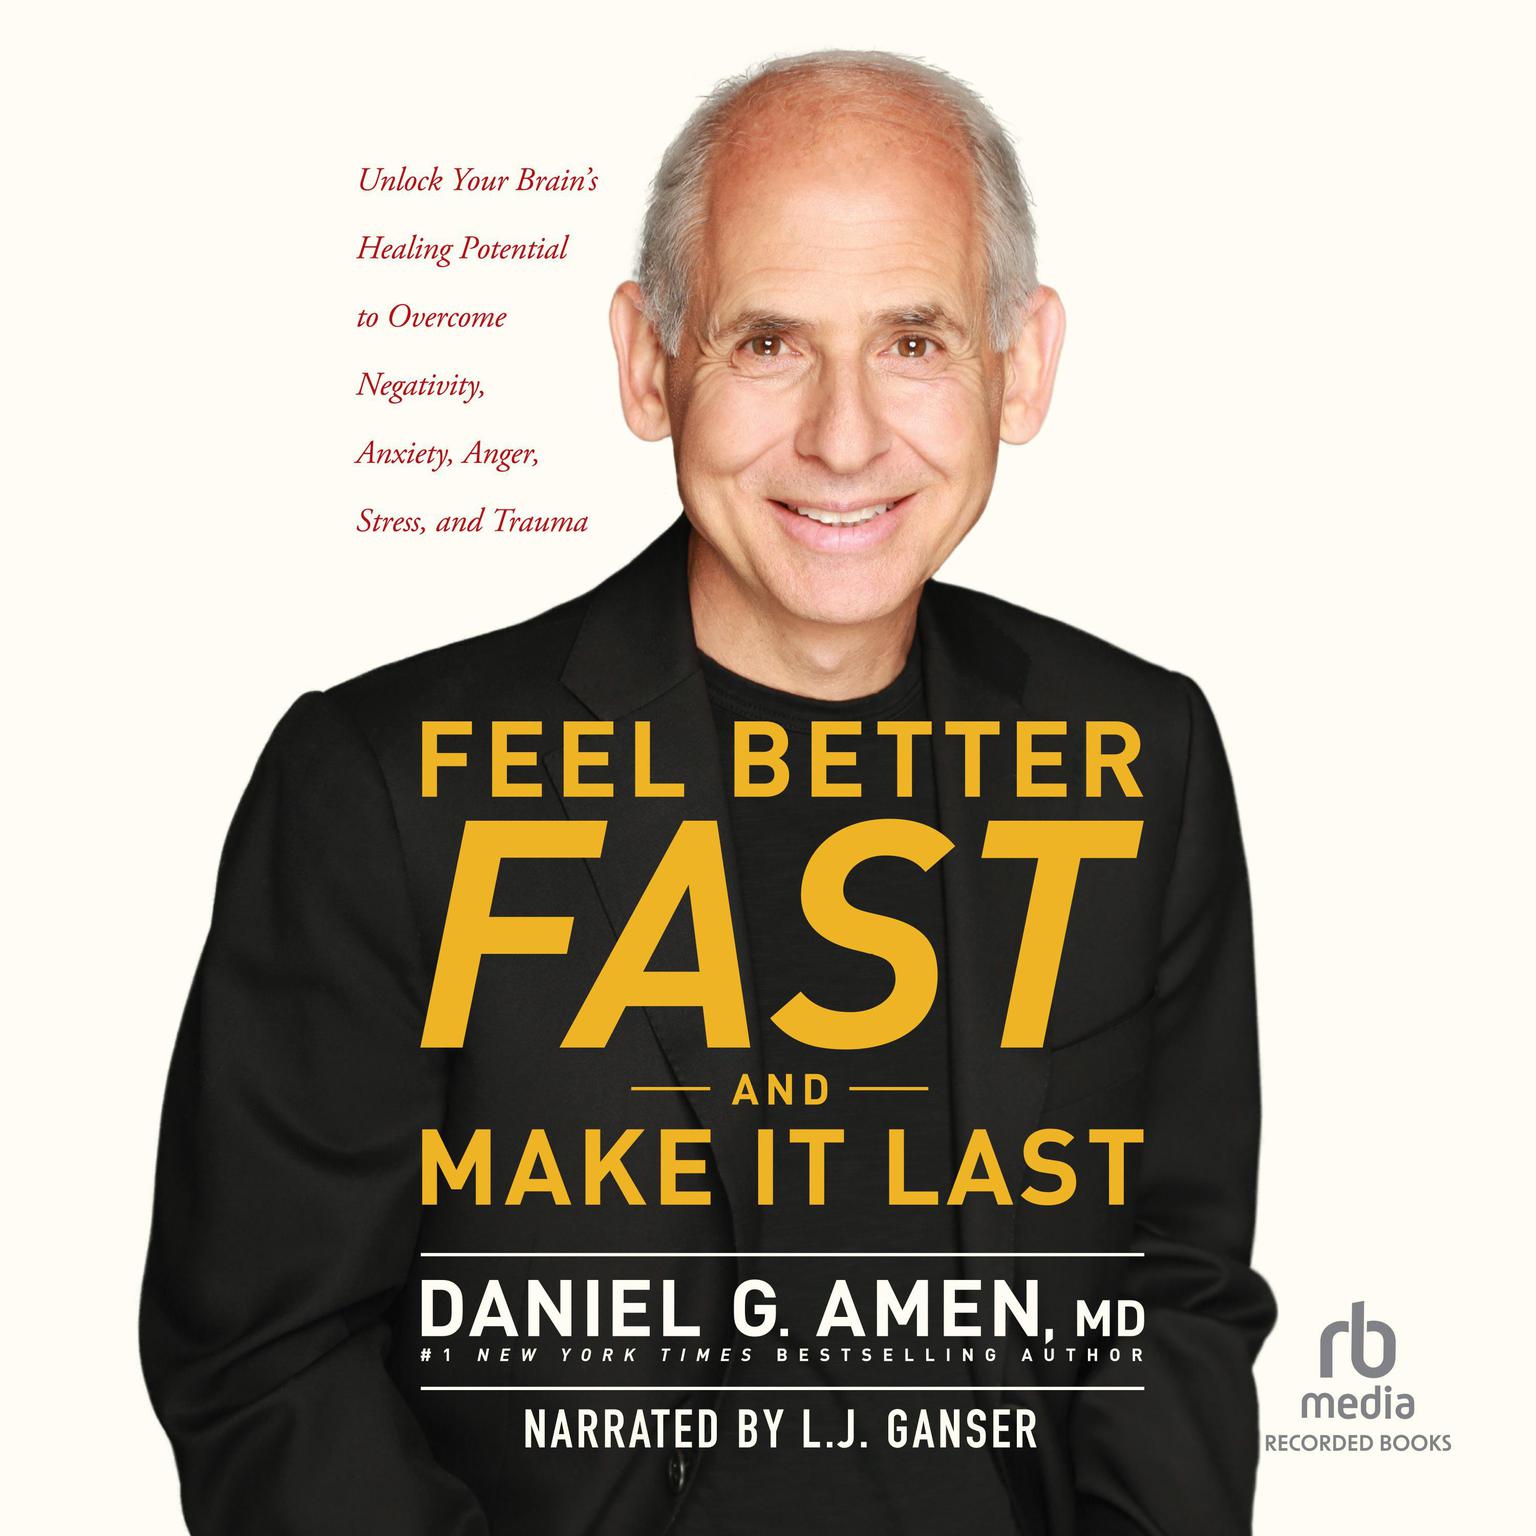 Feel Better Fast and Make It Last: Unlock Your Brains Healing Potential to Overcome Negativity, Anxiety, Anger, Stress, and Trauma Audiobook, by Daniel G. Amen